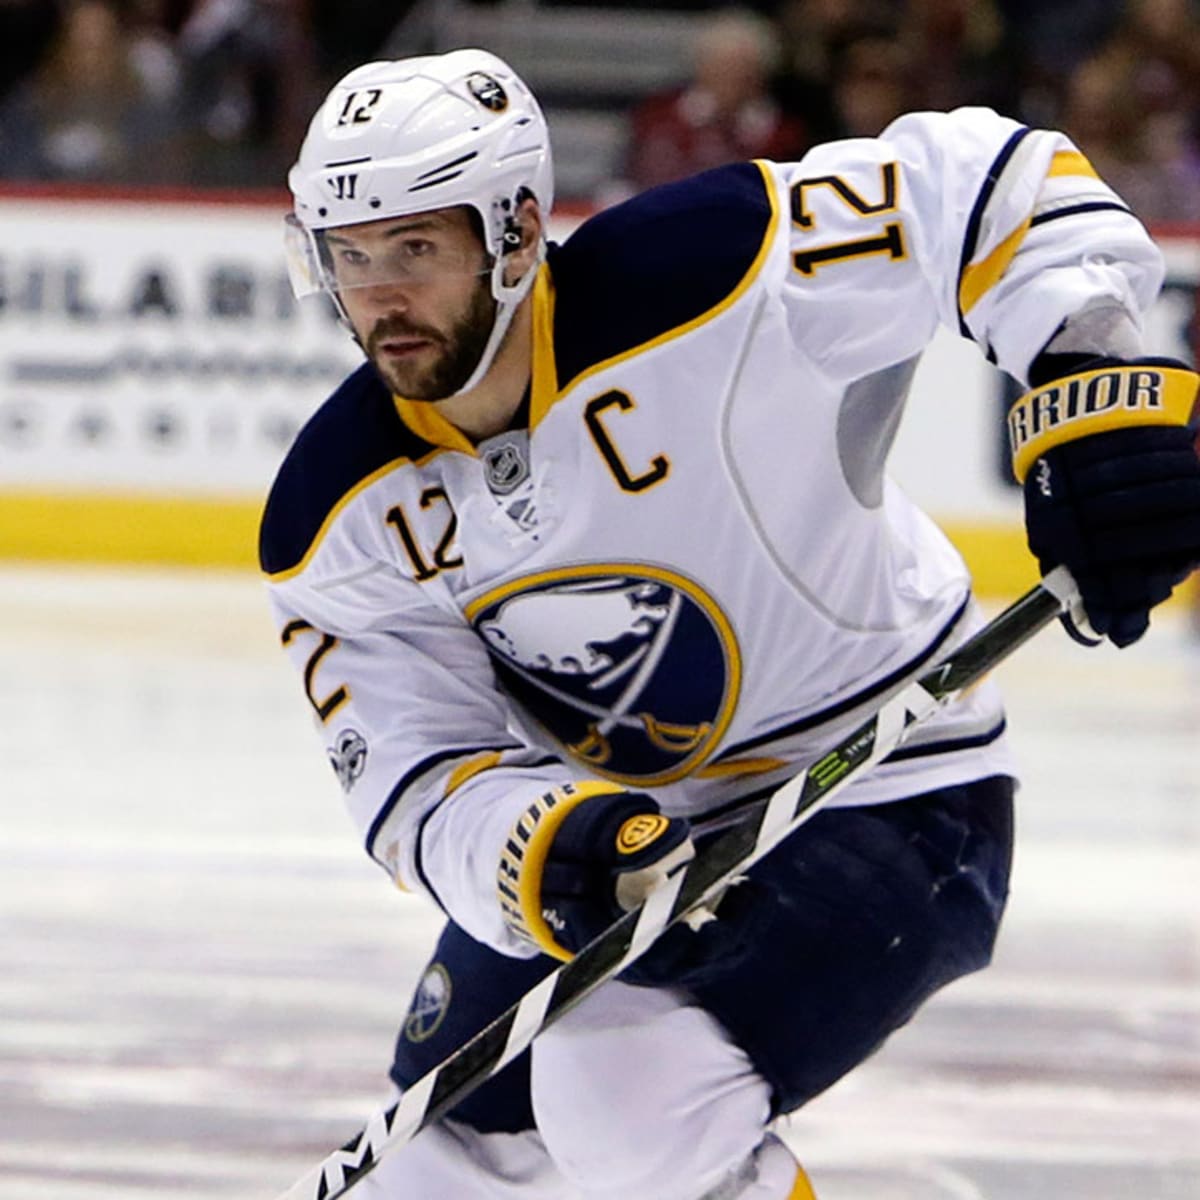 Who is Brian Gionta?